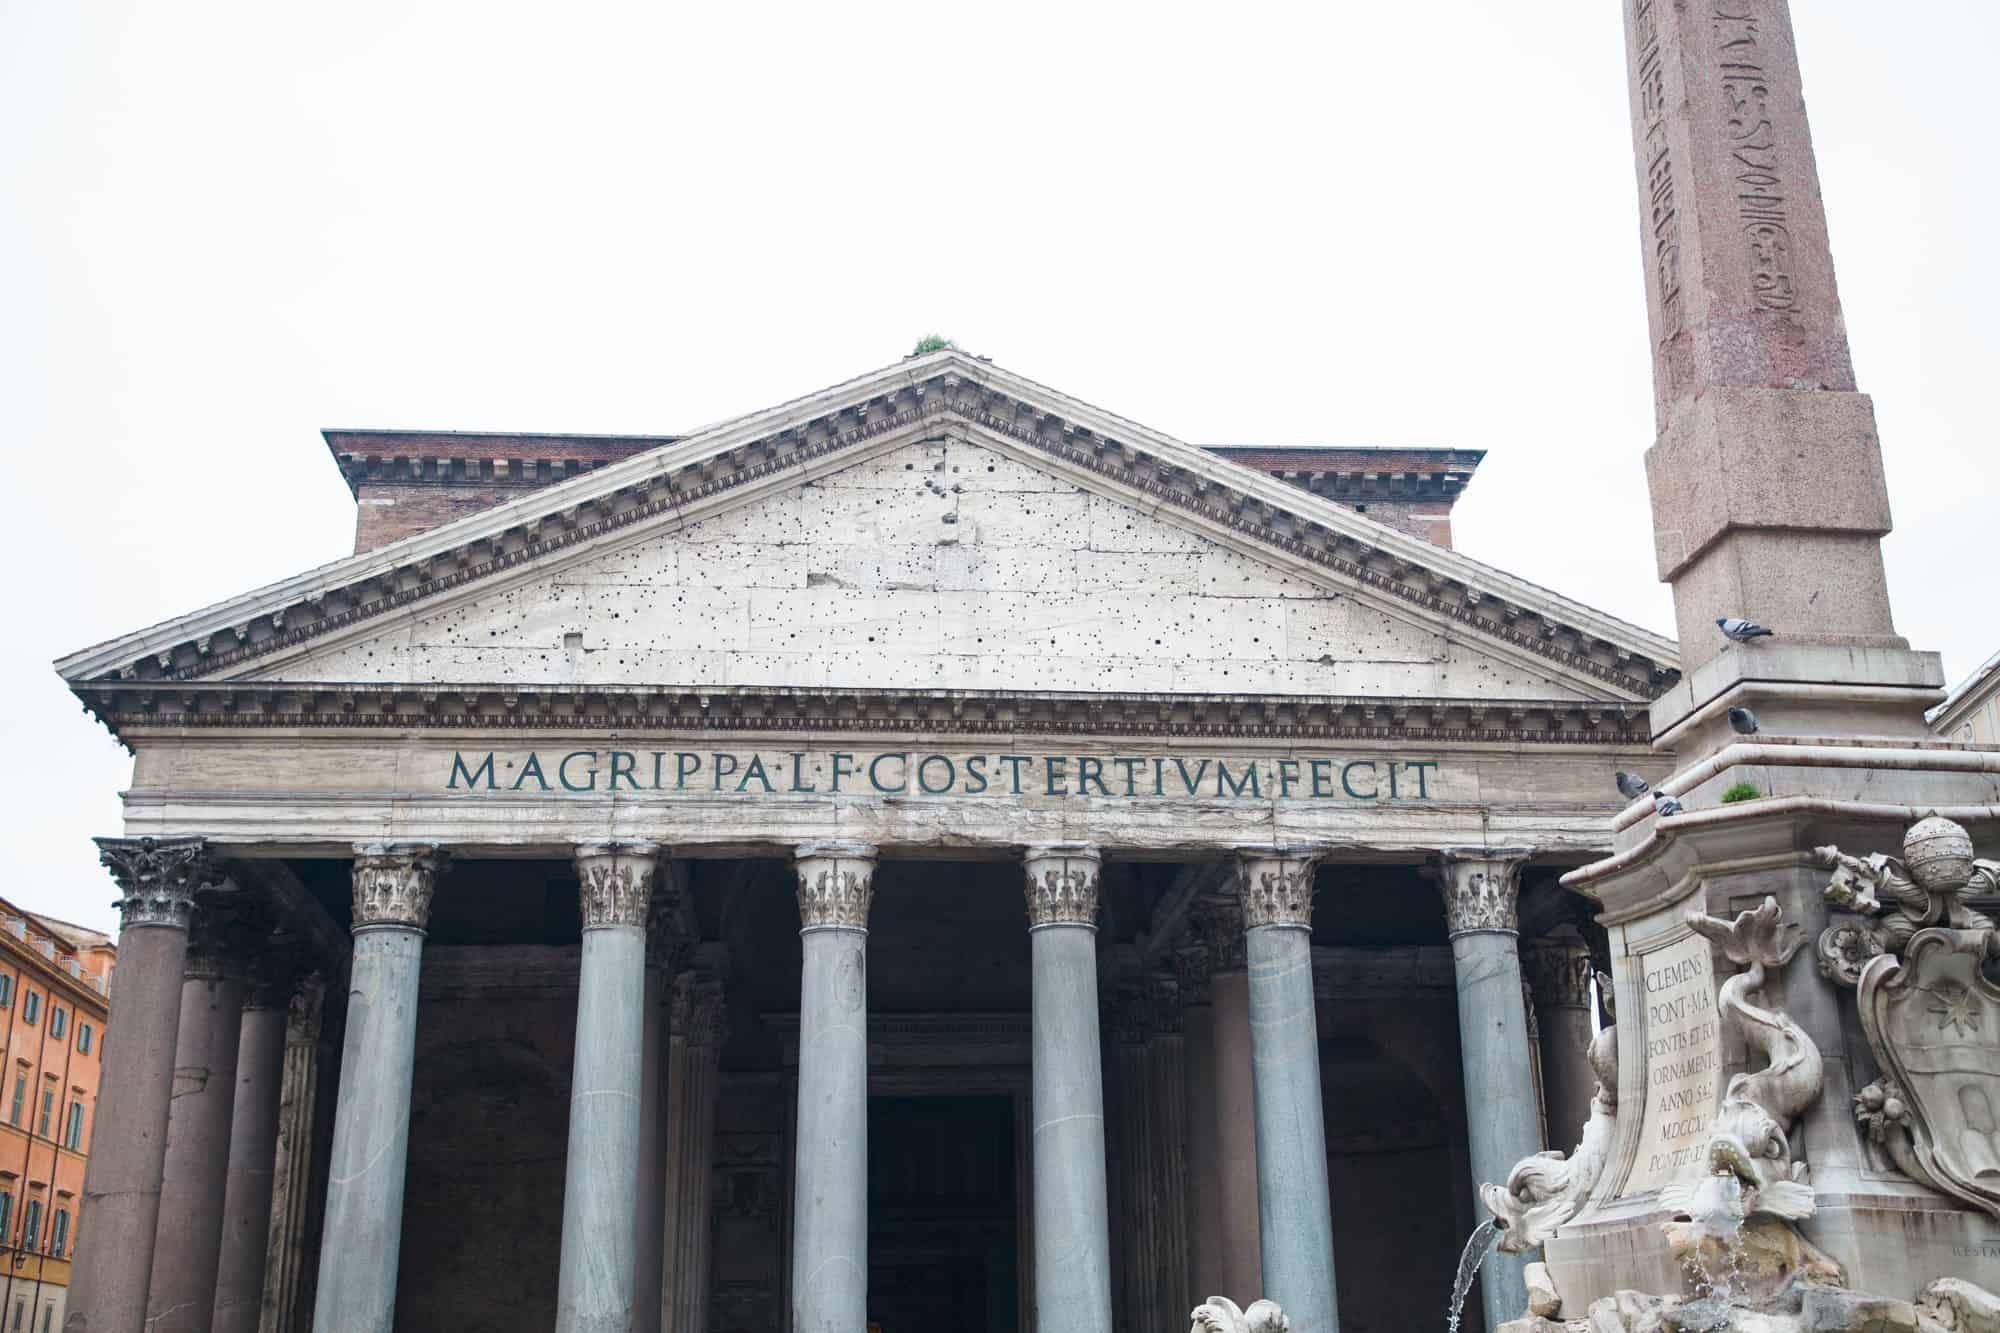 Rome, Attractions Archive, Rome-Attractions-Pantheon.